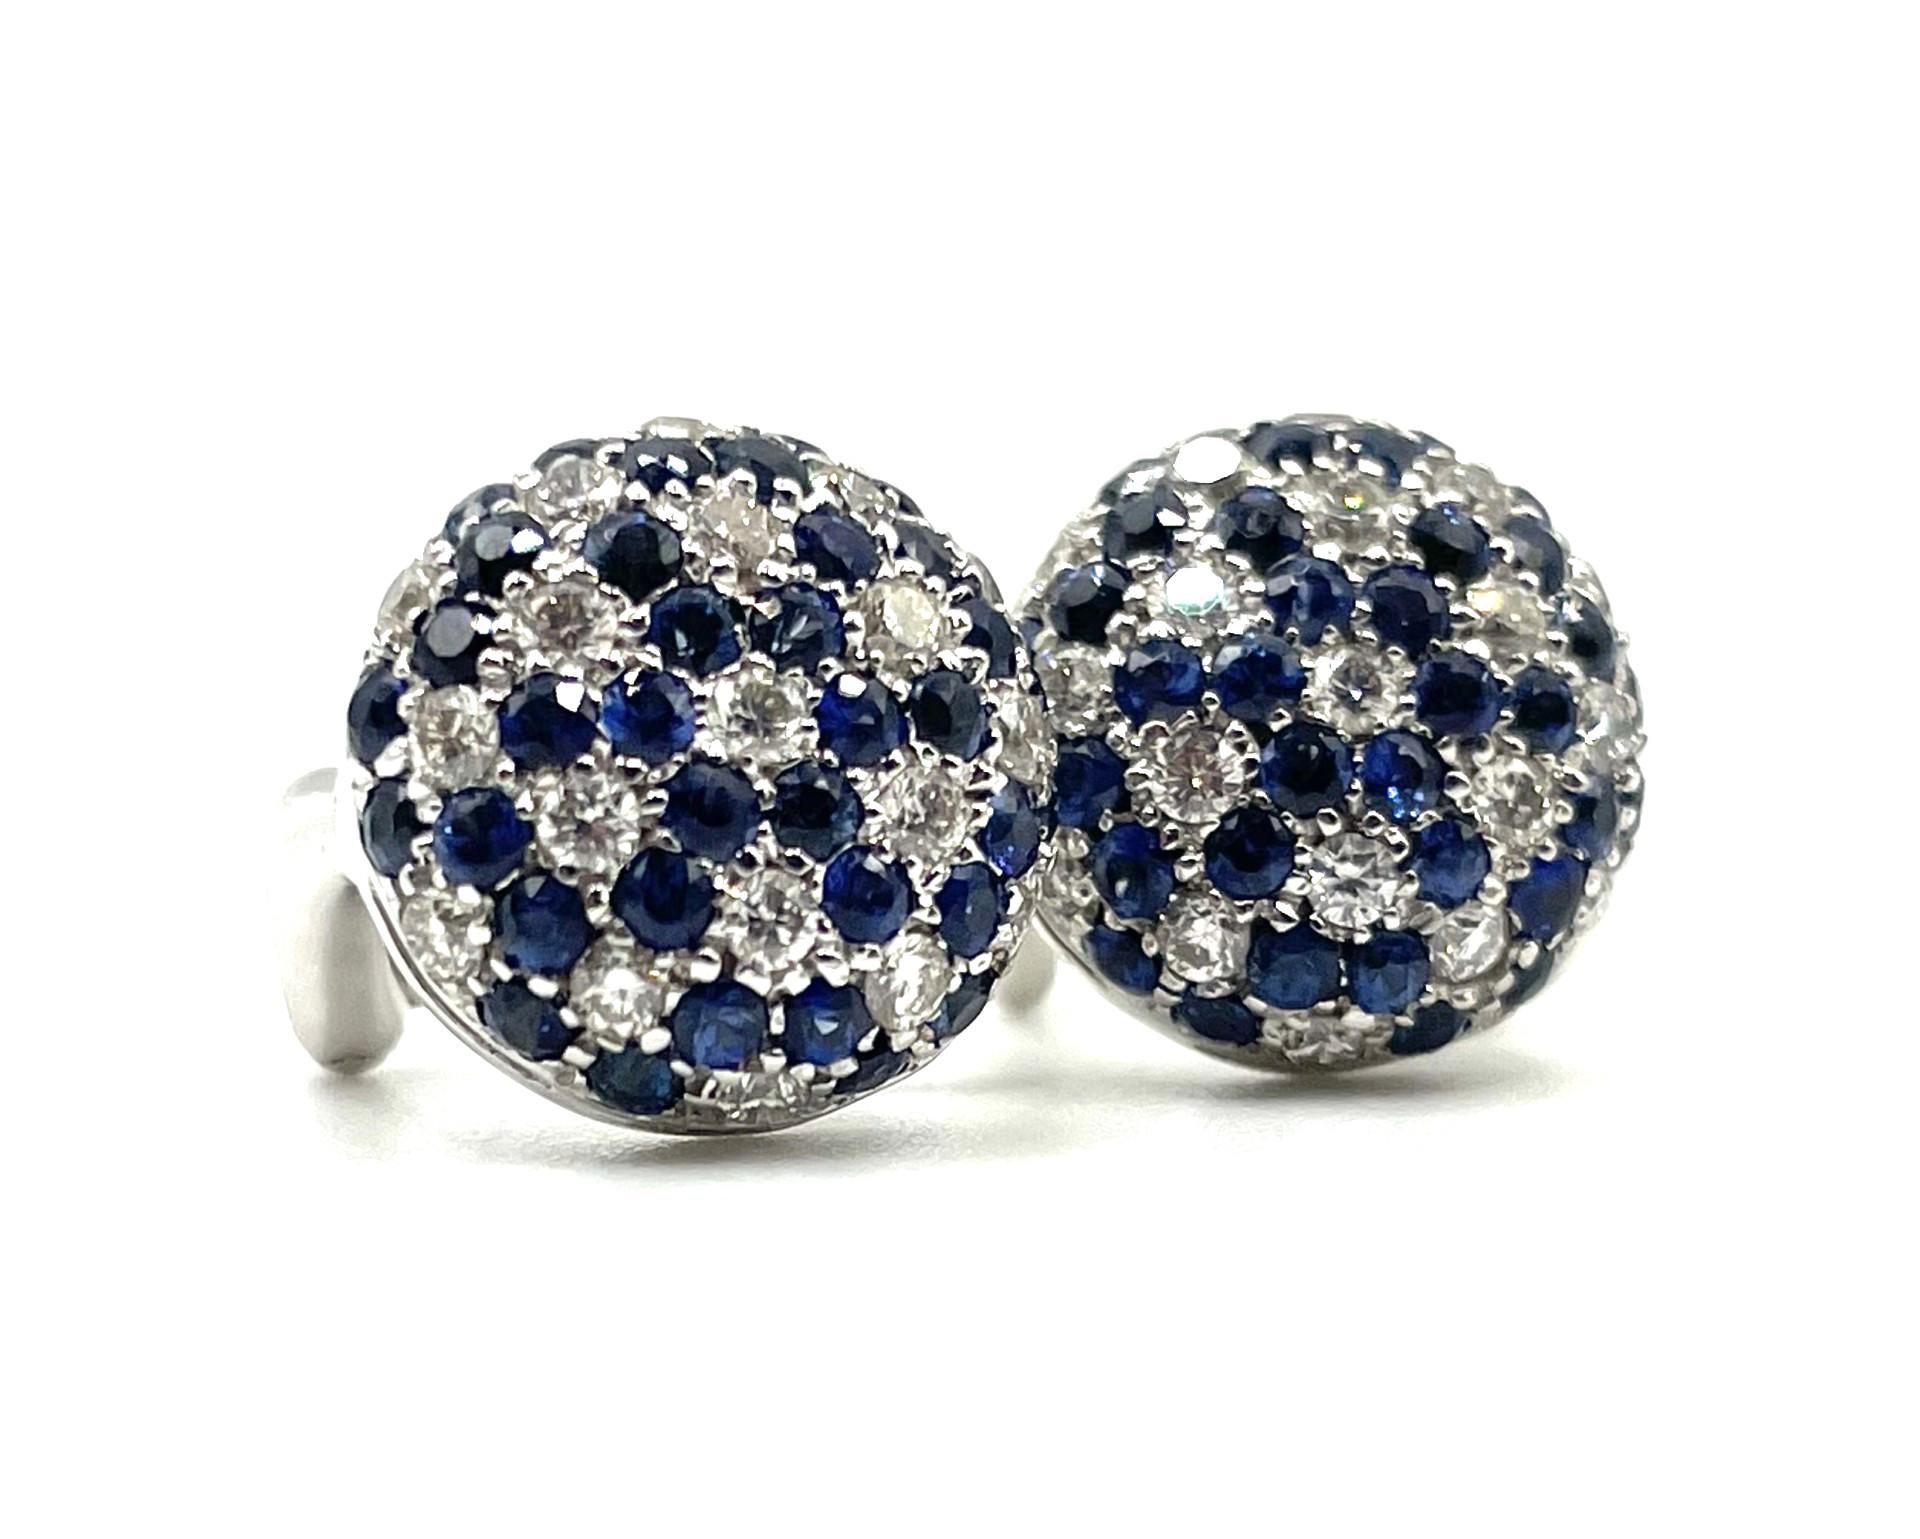 A pair of 18kt white gold, natural blue sapphire and brillant cut  diamond earrings with a  straight  post and omega clip system. Beautiful to wear on any occasion.

72  natural blue sapphires 1.50ct total weight

38 brilliant cut diamonds 0.60ct